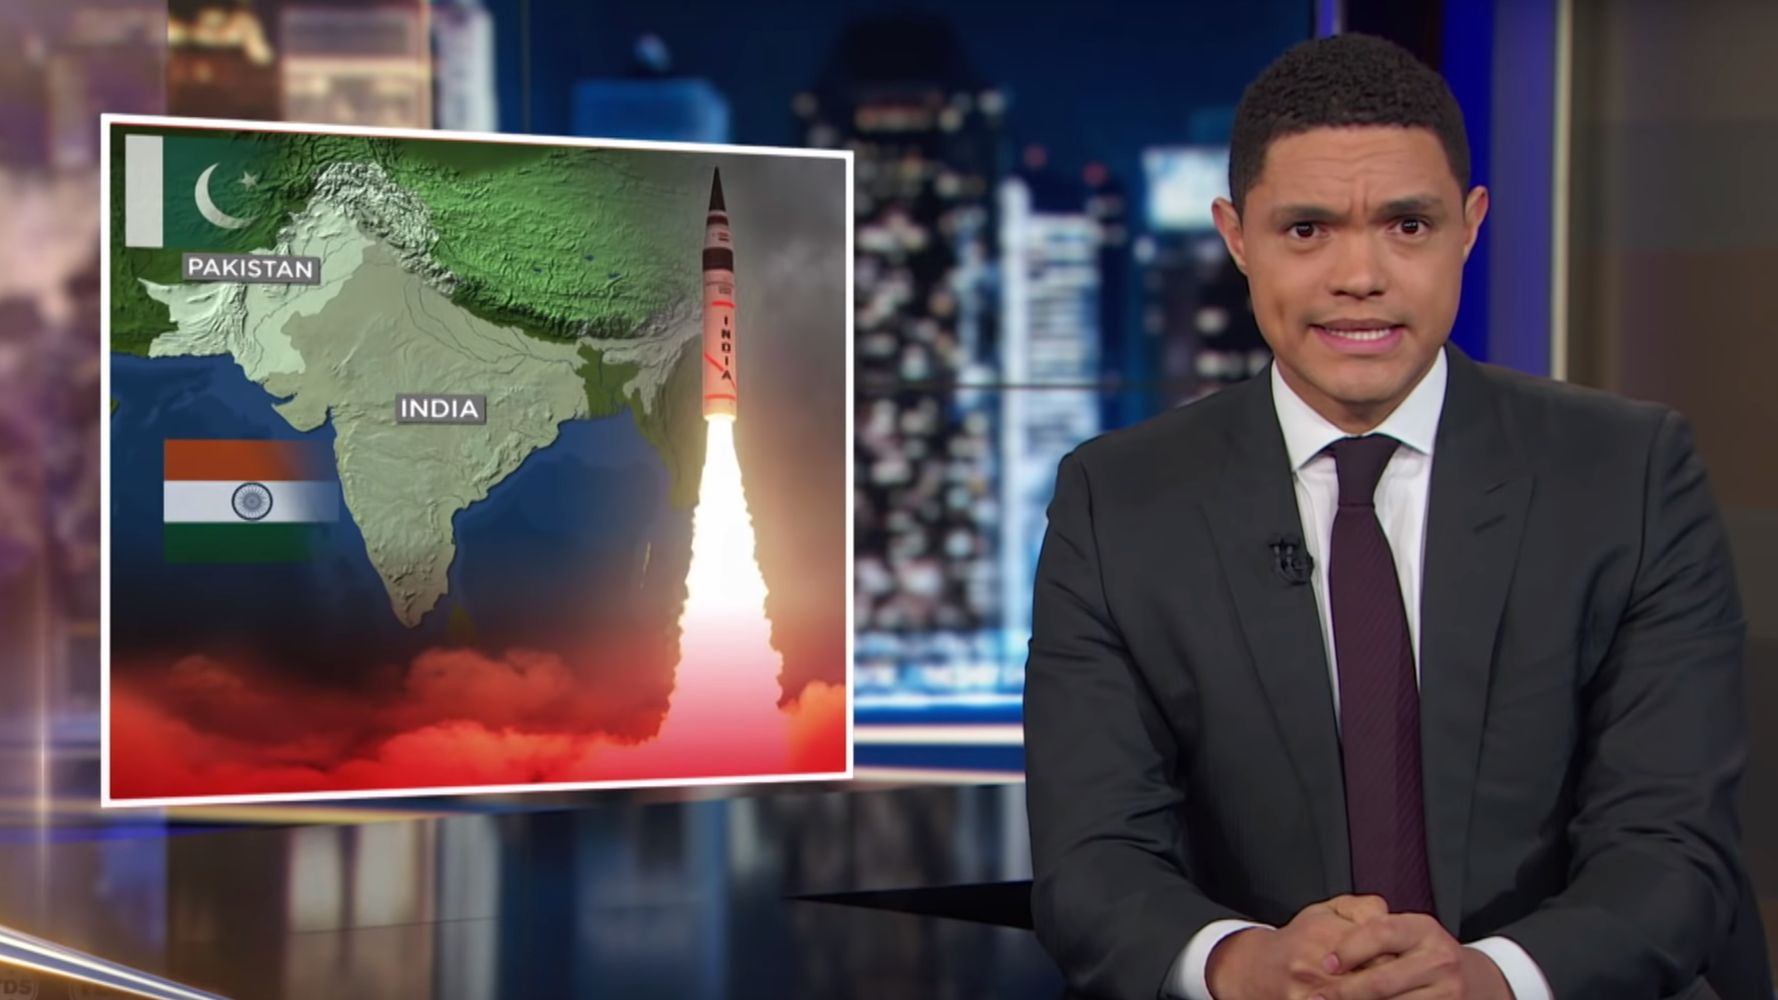 Racist Offensive Trevor Noah Called Out For Joke On India